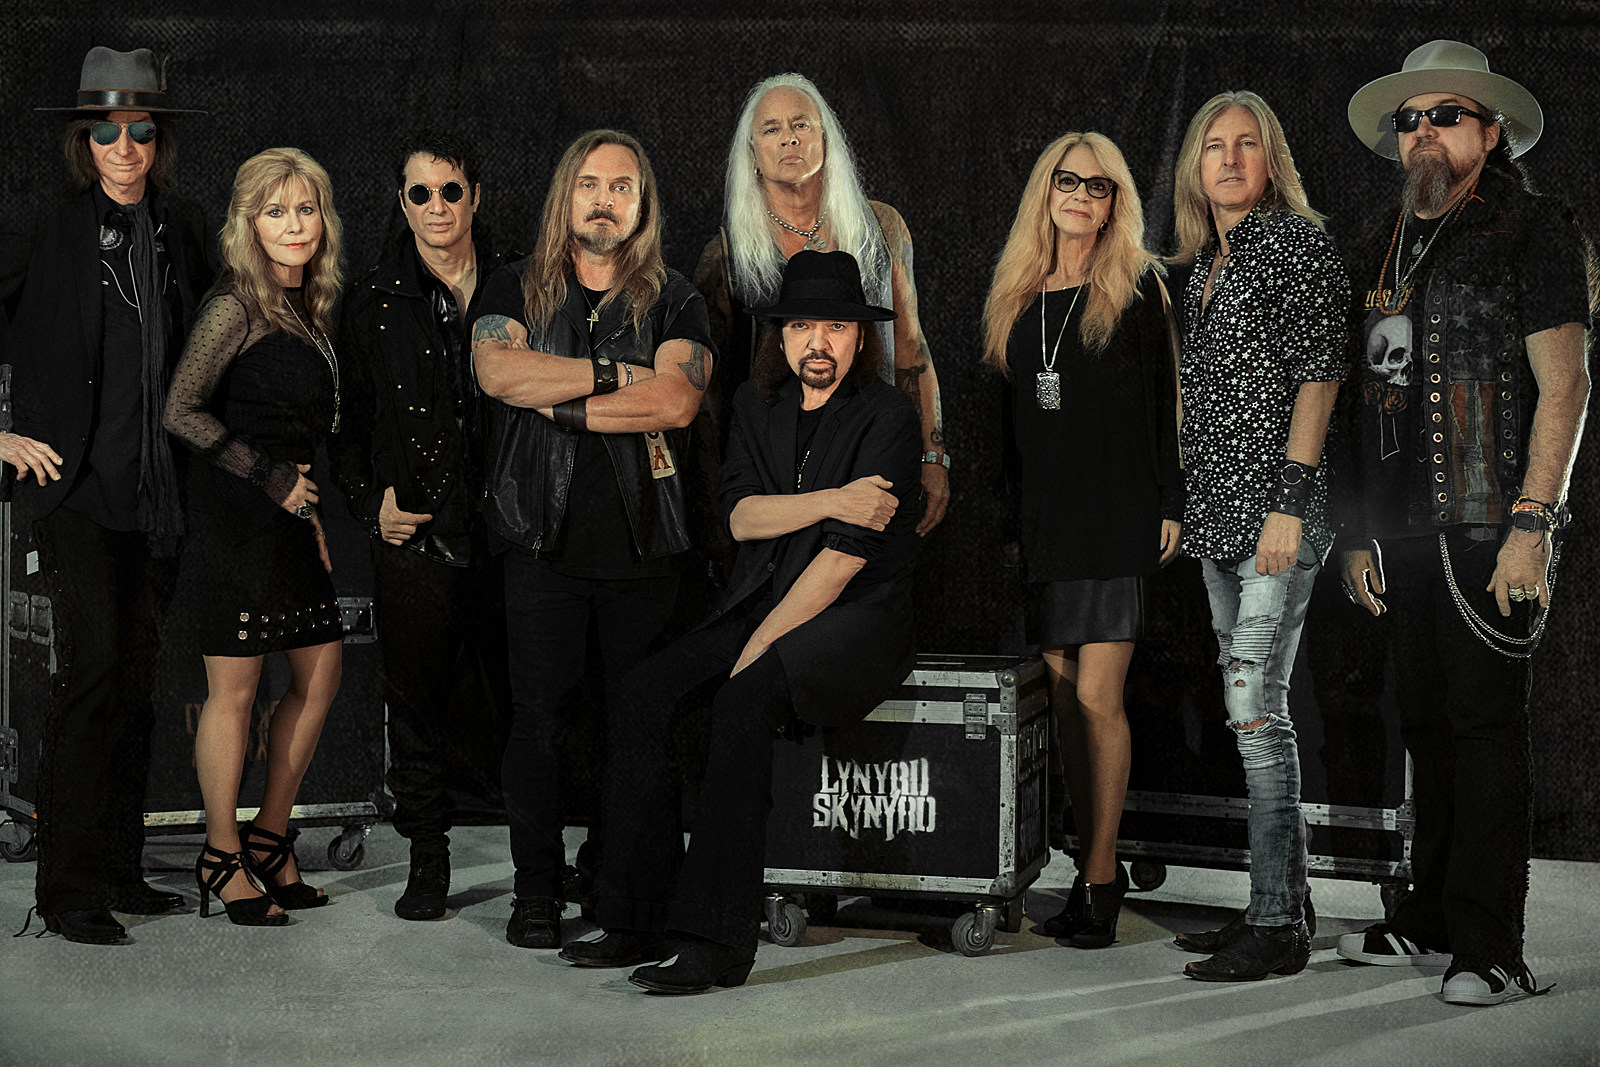 Get Tickets Early To See Lynyrd Skynyrd With This Presale Code